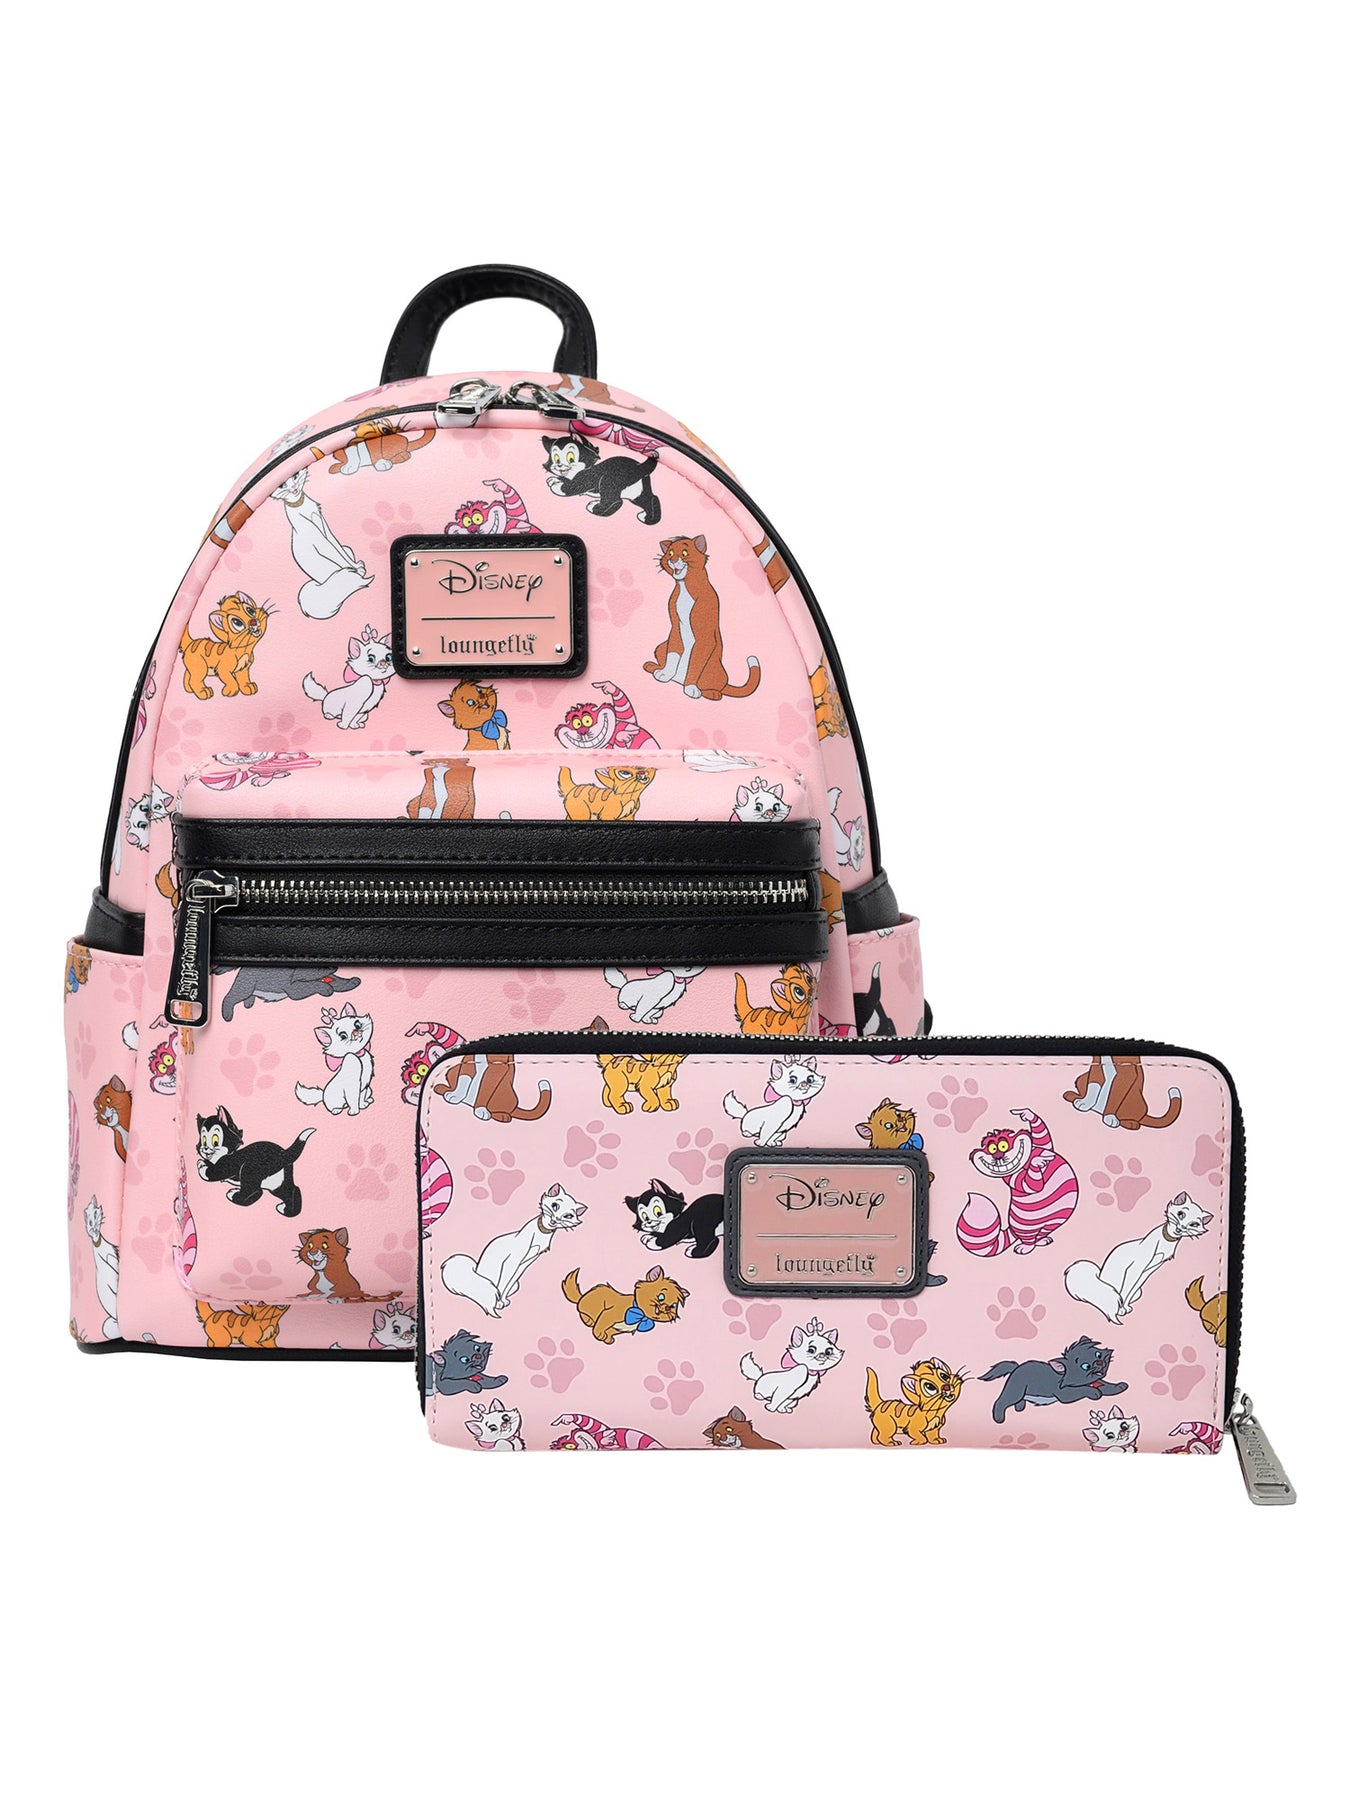 We Found the 1 Minnie Mouse Backpack You Need in Your Life ASAP | Minnie  mouse backpack, Bags, Disney bags backpacks